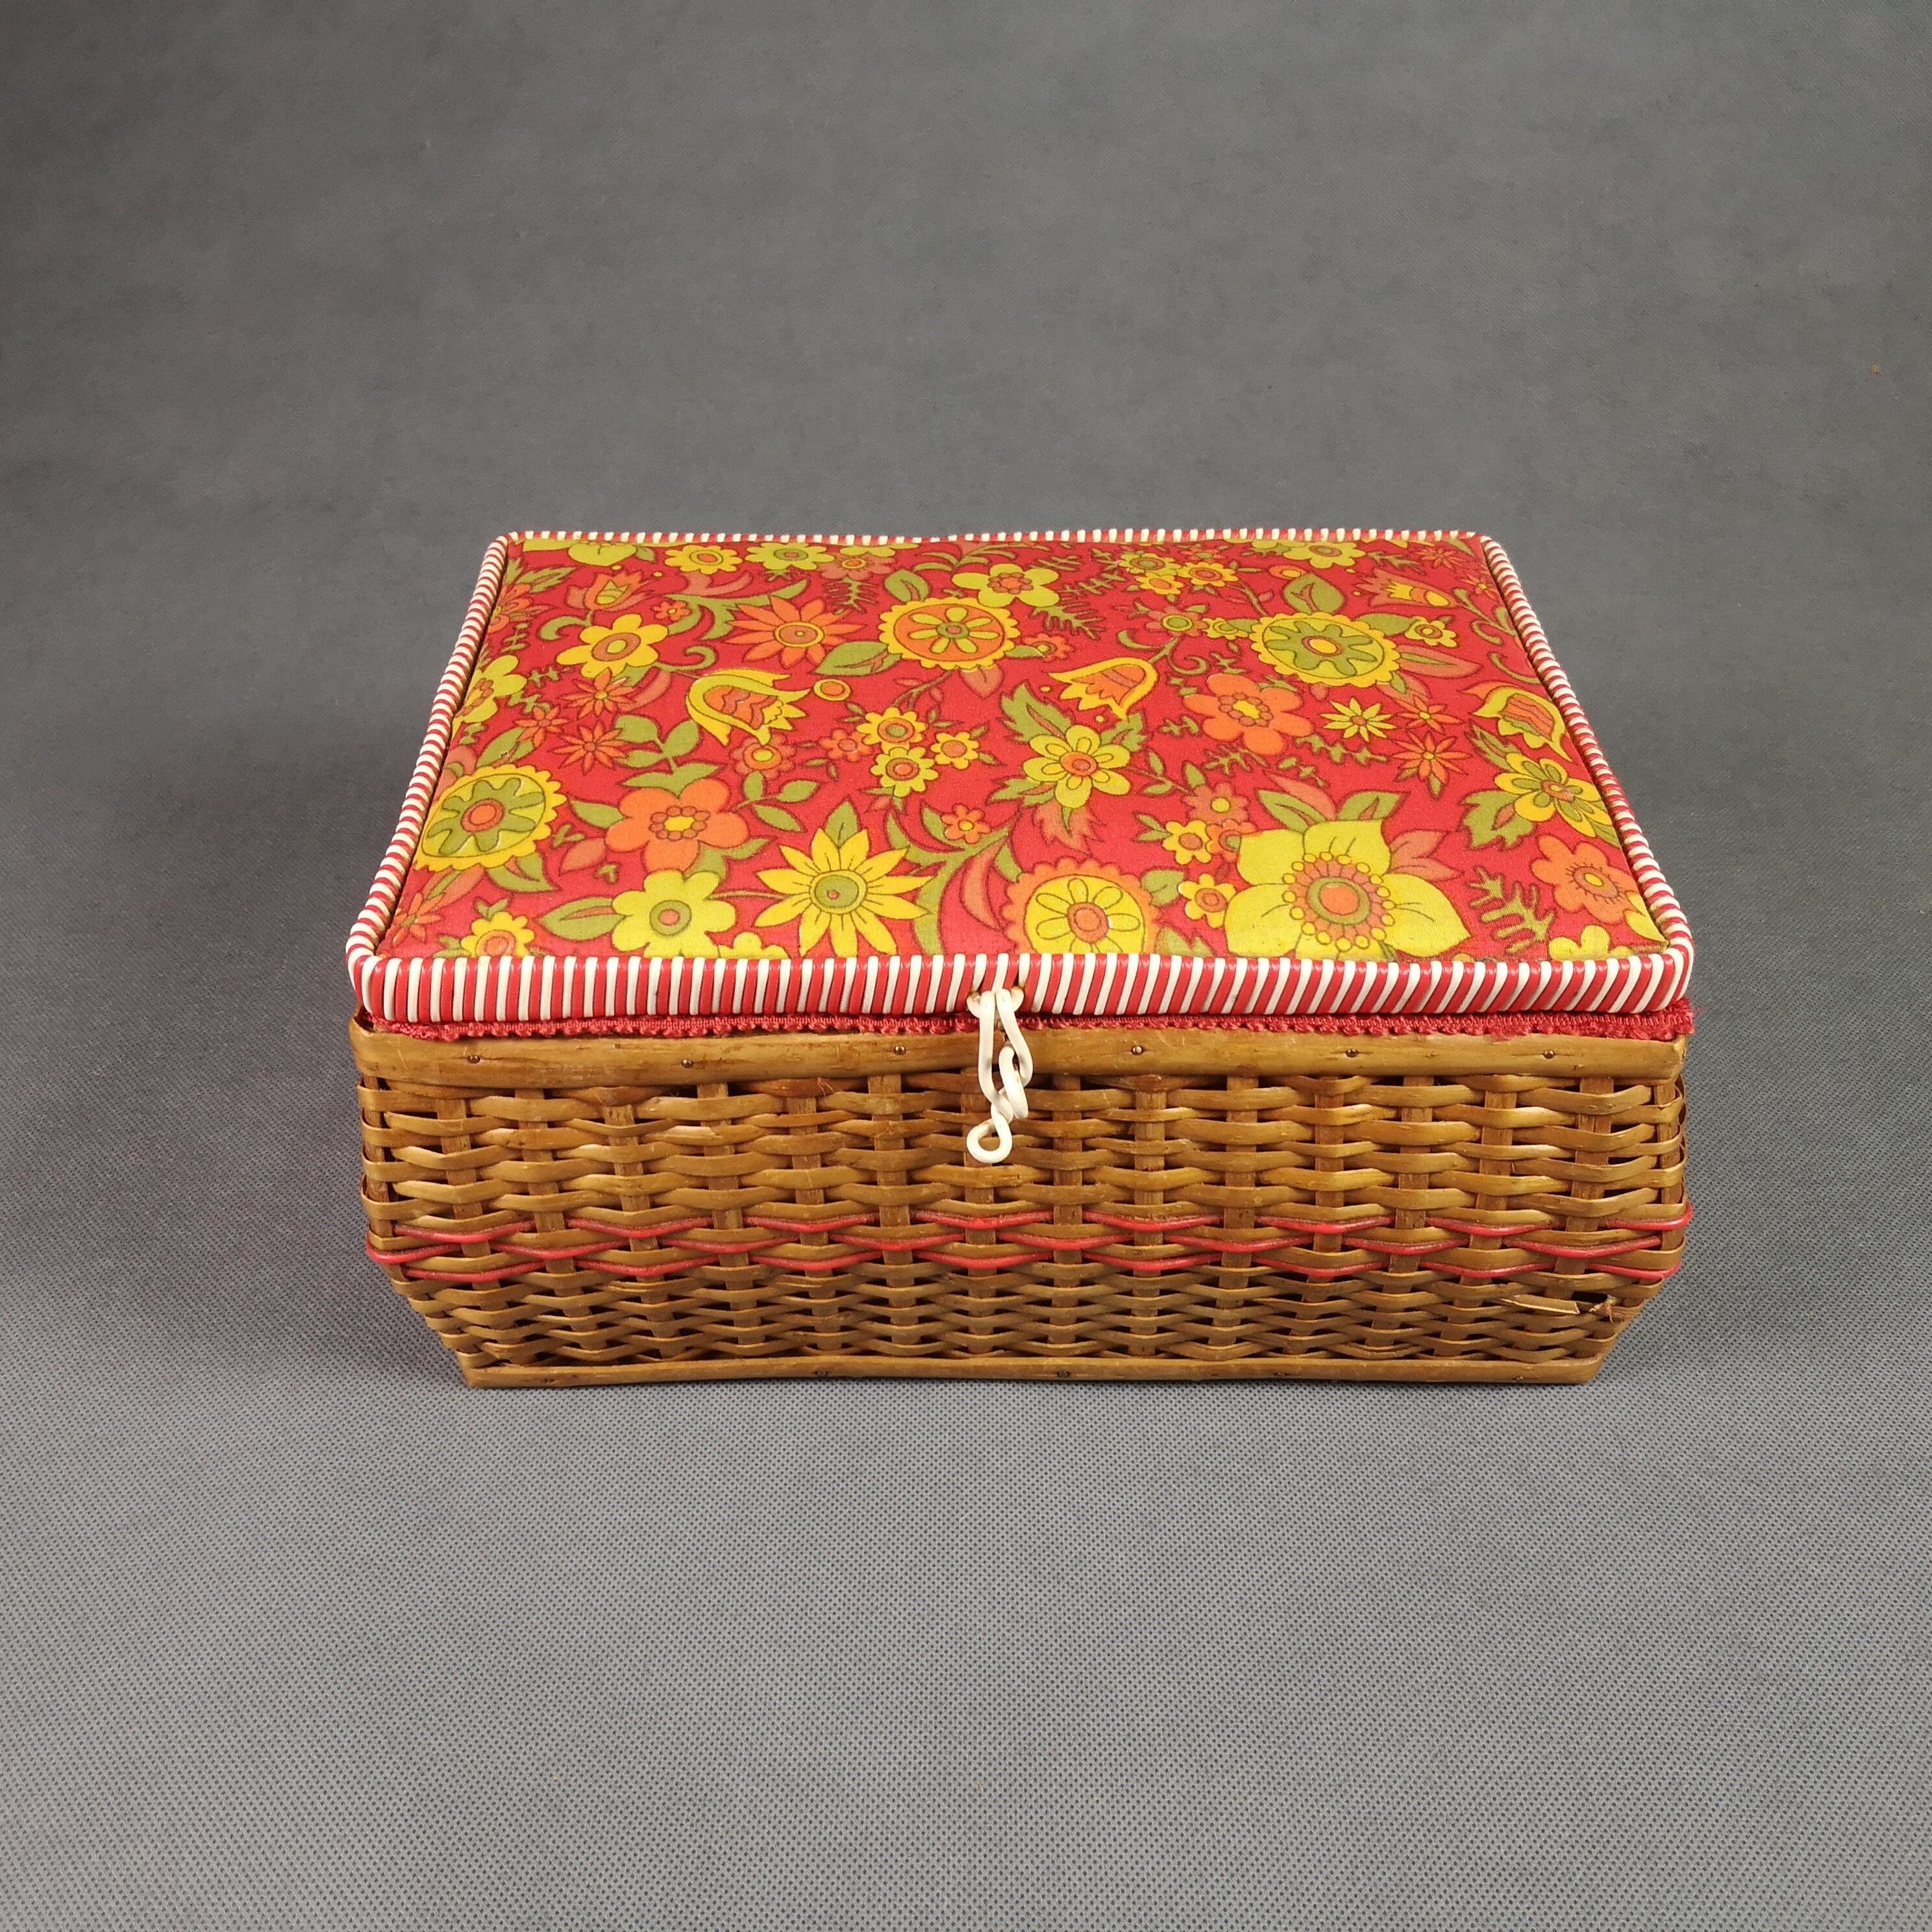 Vintage Sewing Basket/box With Quilted Fabric Top, Plastic Twine